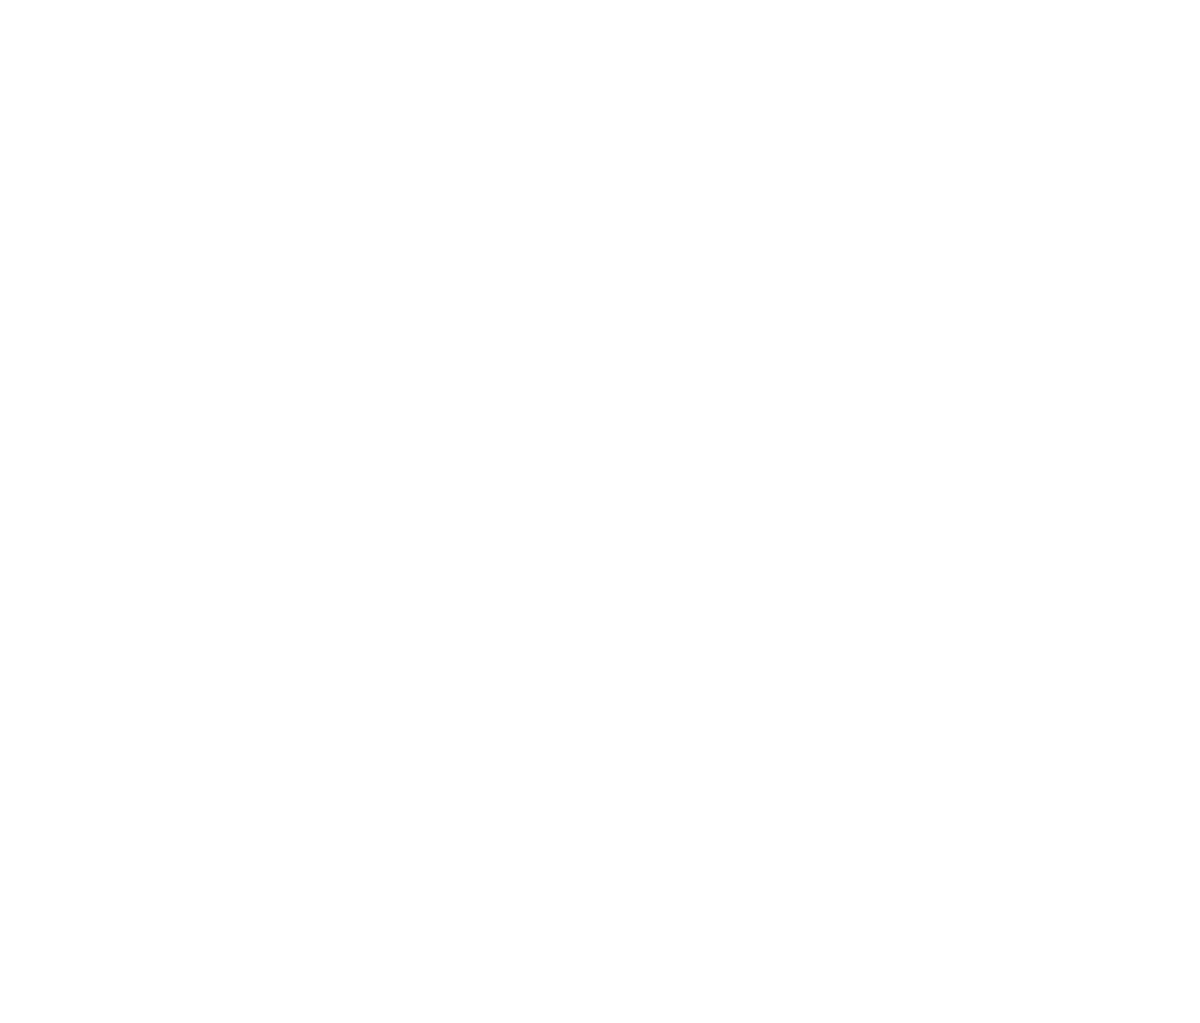 RAMSEY REALTY GROUP, LLC. - CHICAGO REAL ESTATE COMPANY